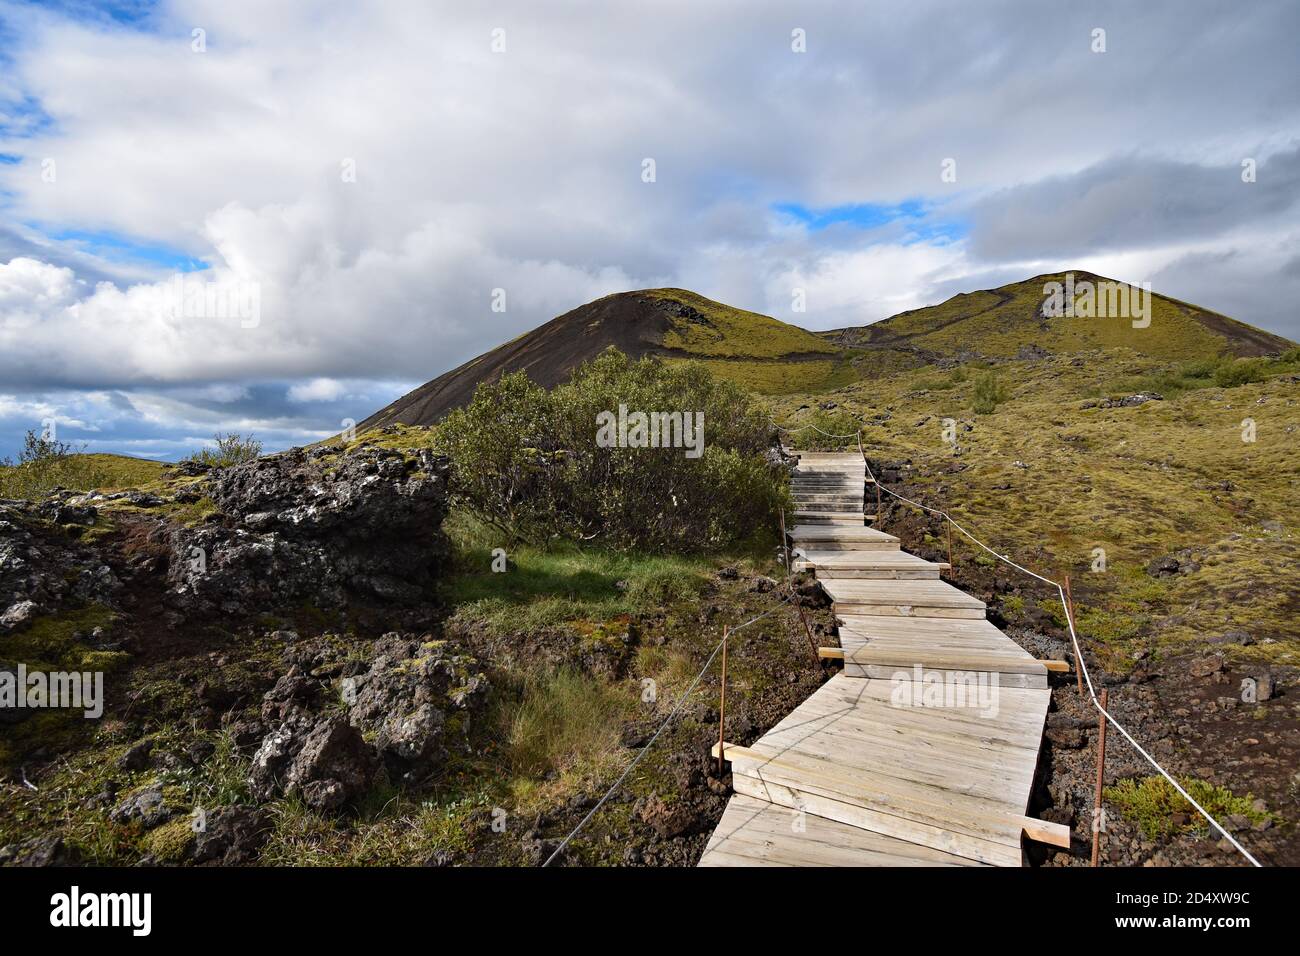 A wooden boardwalk passes lava rock and leads to the rim of Grabrok Volcano Crater in the Nordurardalur Valley in Western Iceland. Stock Photo